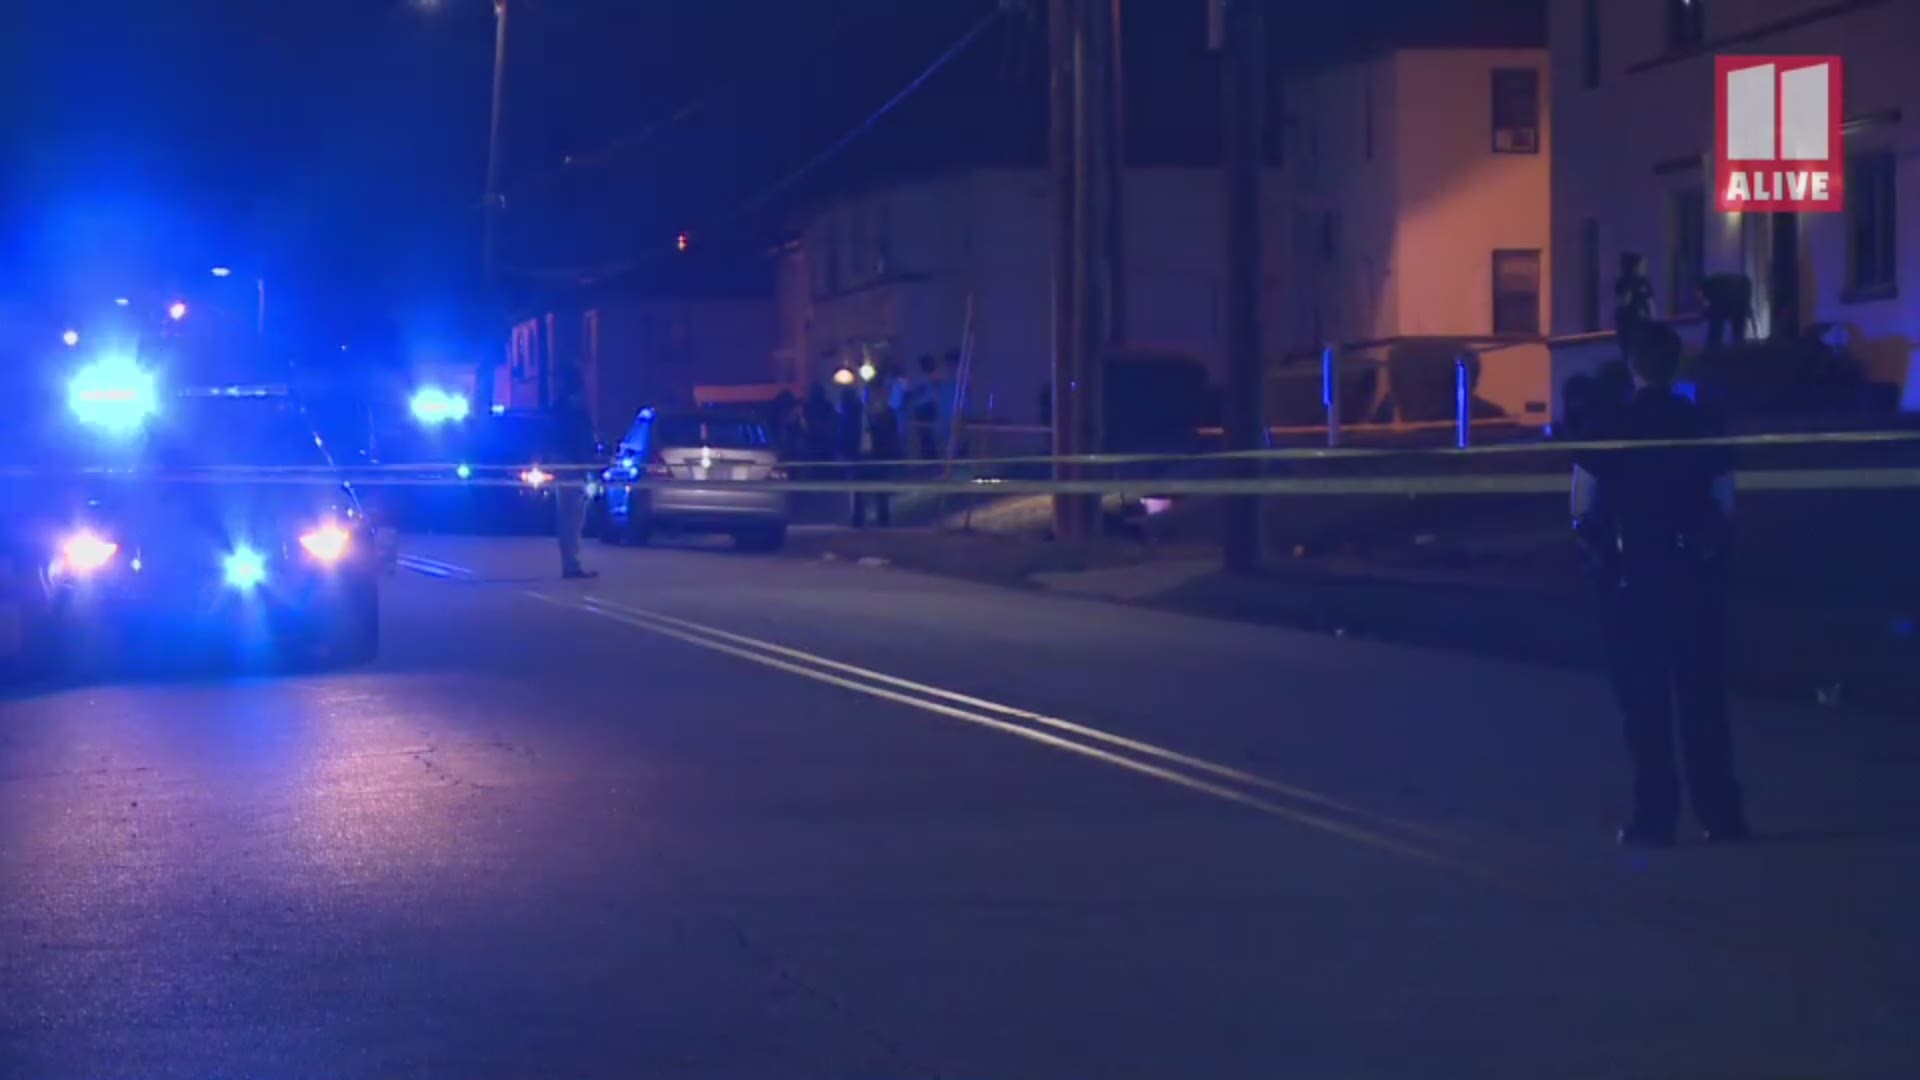 Atlanta Police said they discovered the body of a 30-year-old man outside an apartment building near the corner of Metropolitan Parkway and University Avenue late Friday night. Witnesses reported shooting in the area prior to the discovery of the body.